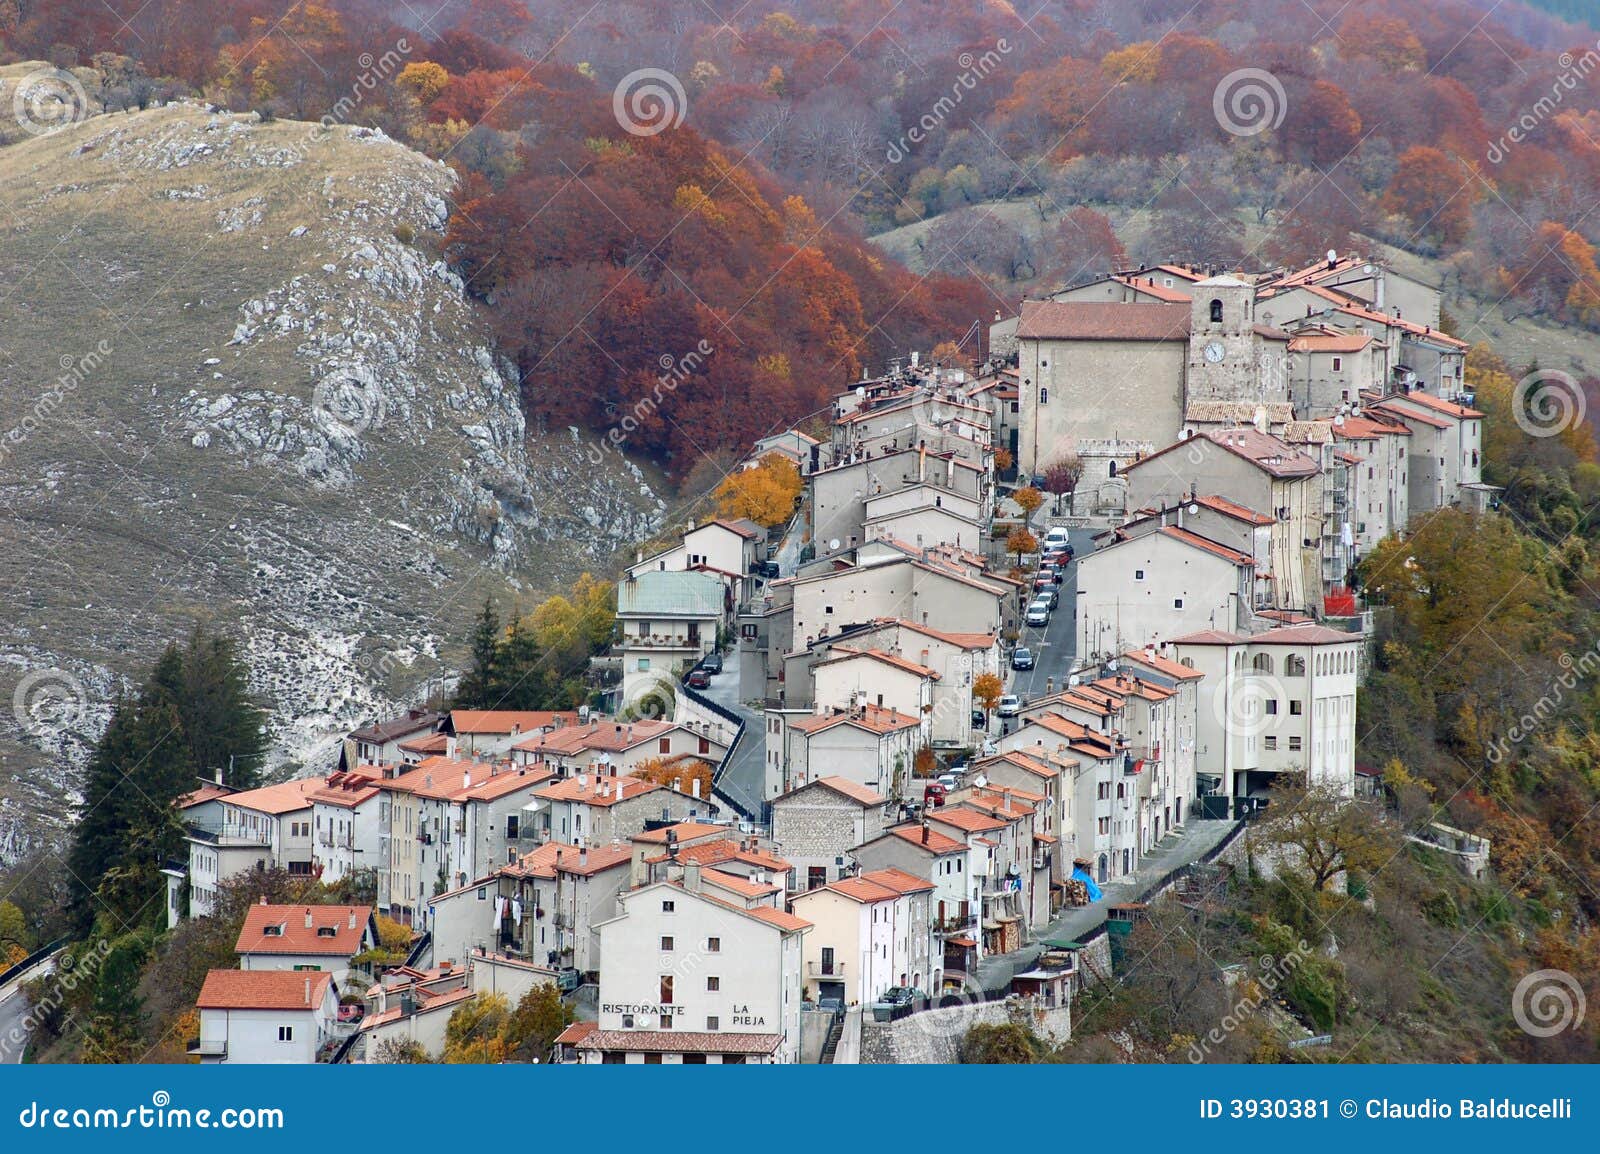 the village of opi at abruzzo national park